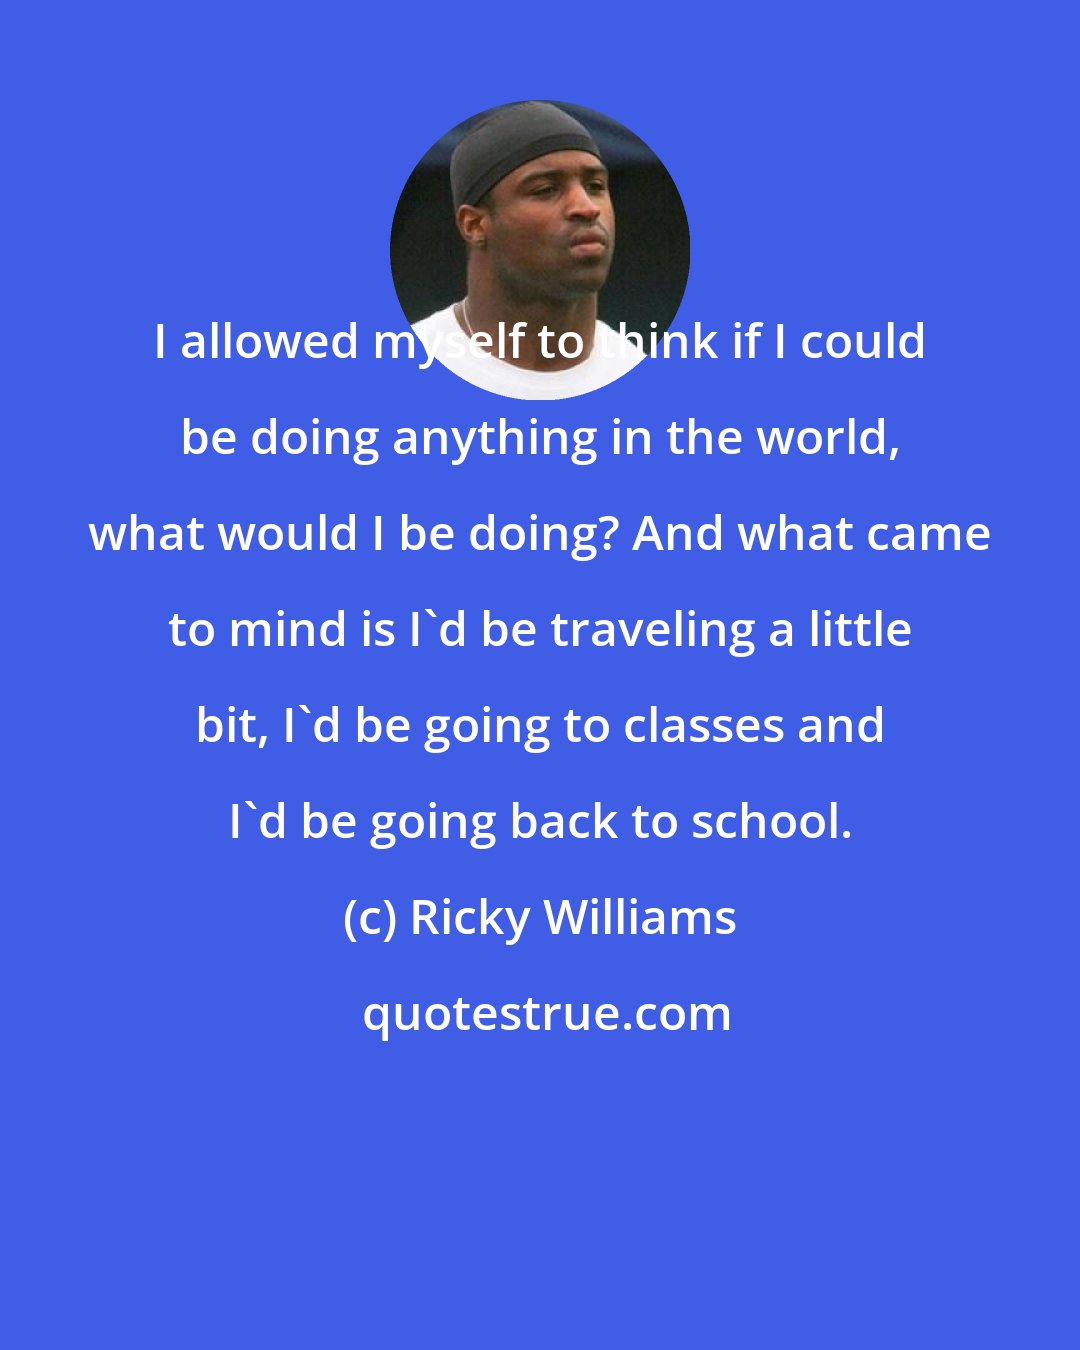 Ricky Williams: I allowed myself to think if I could be doing anything in the world, what would I be doing? And what came to mind is I'd be traveling a little bit, I'd be going to classes and I'd be going back to school.